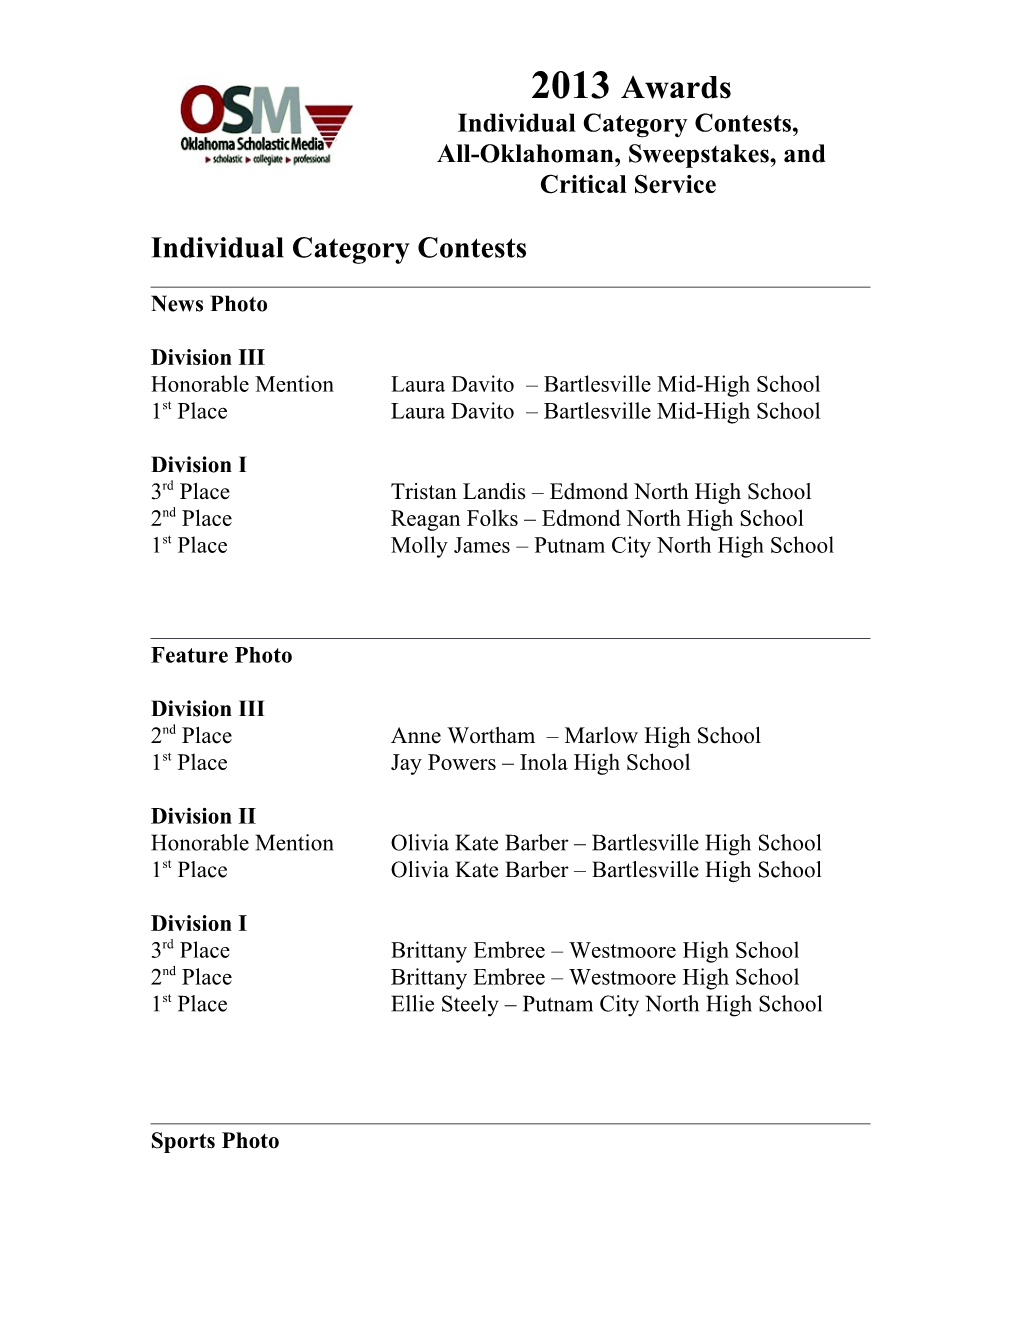 Oklahoma Scholastic Media 2013Awards and Critical Service Ratings Page 1 of 14